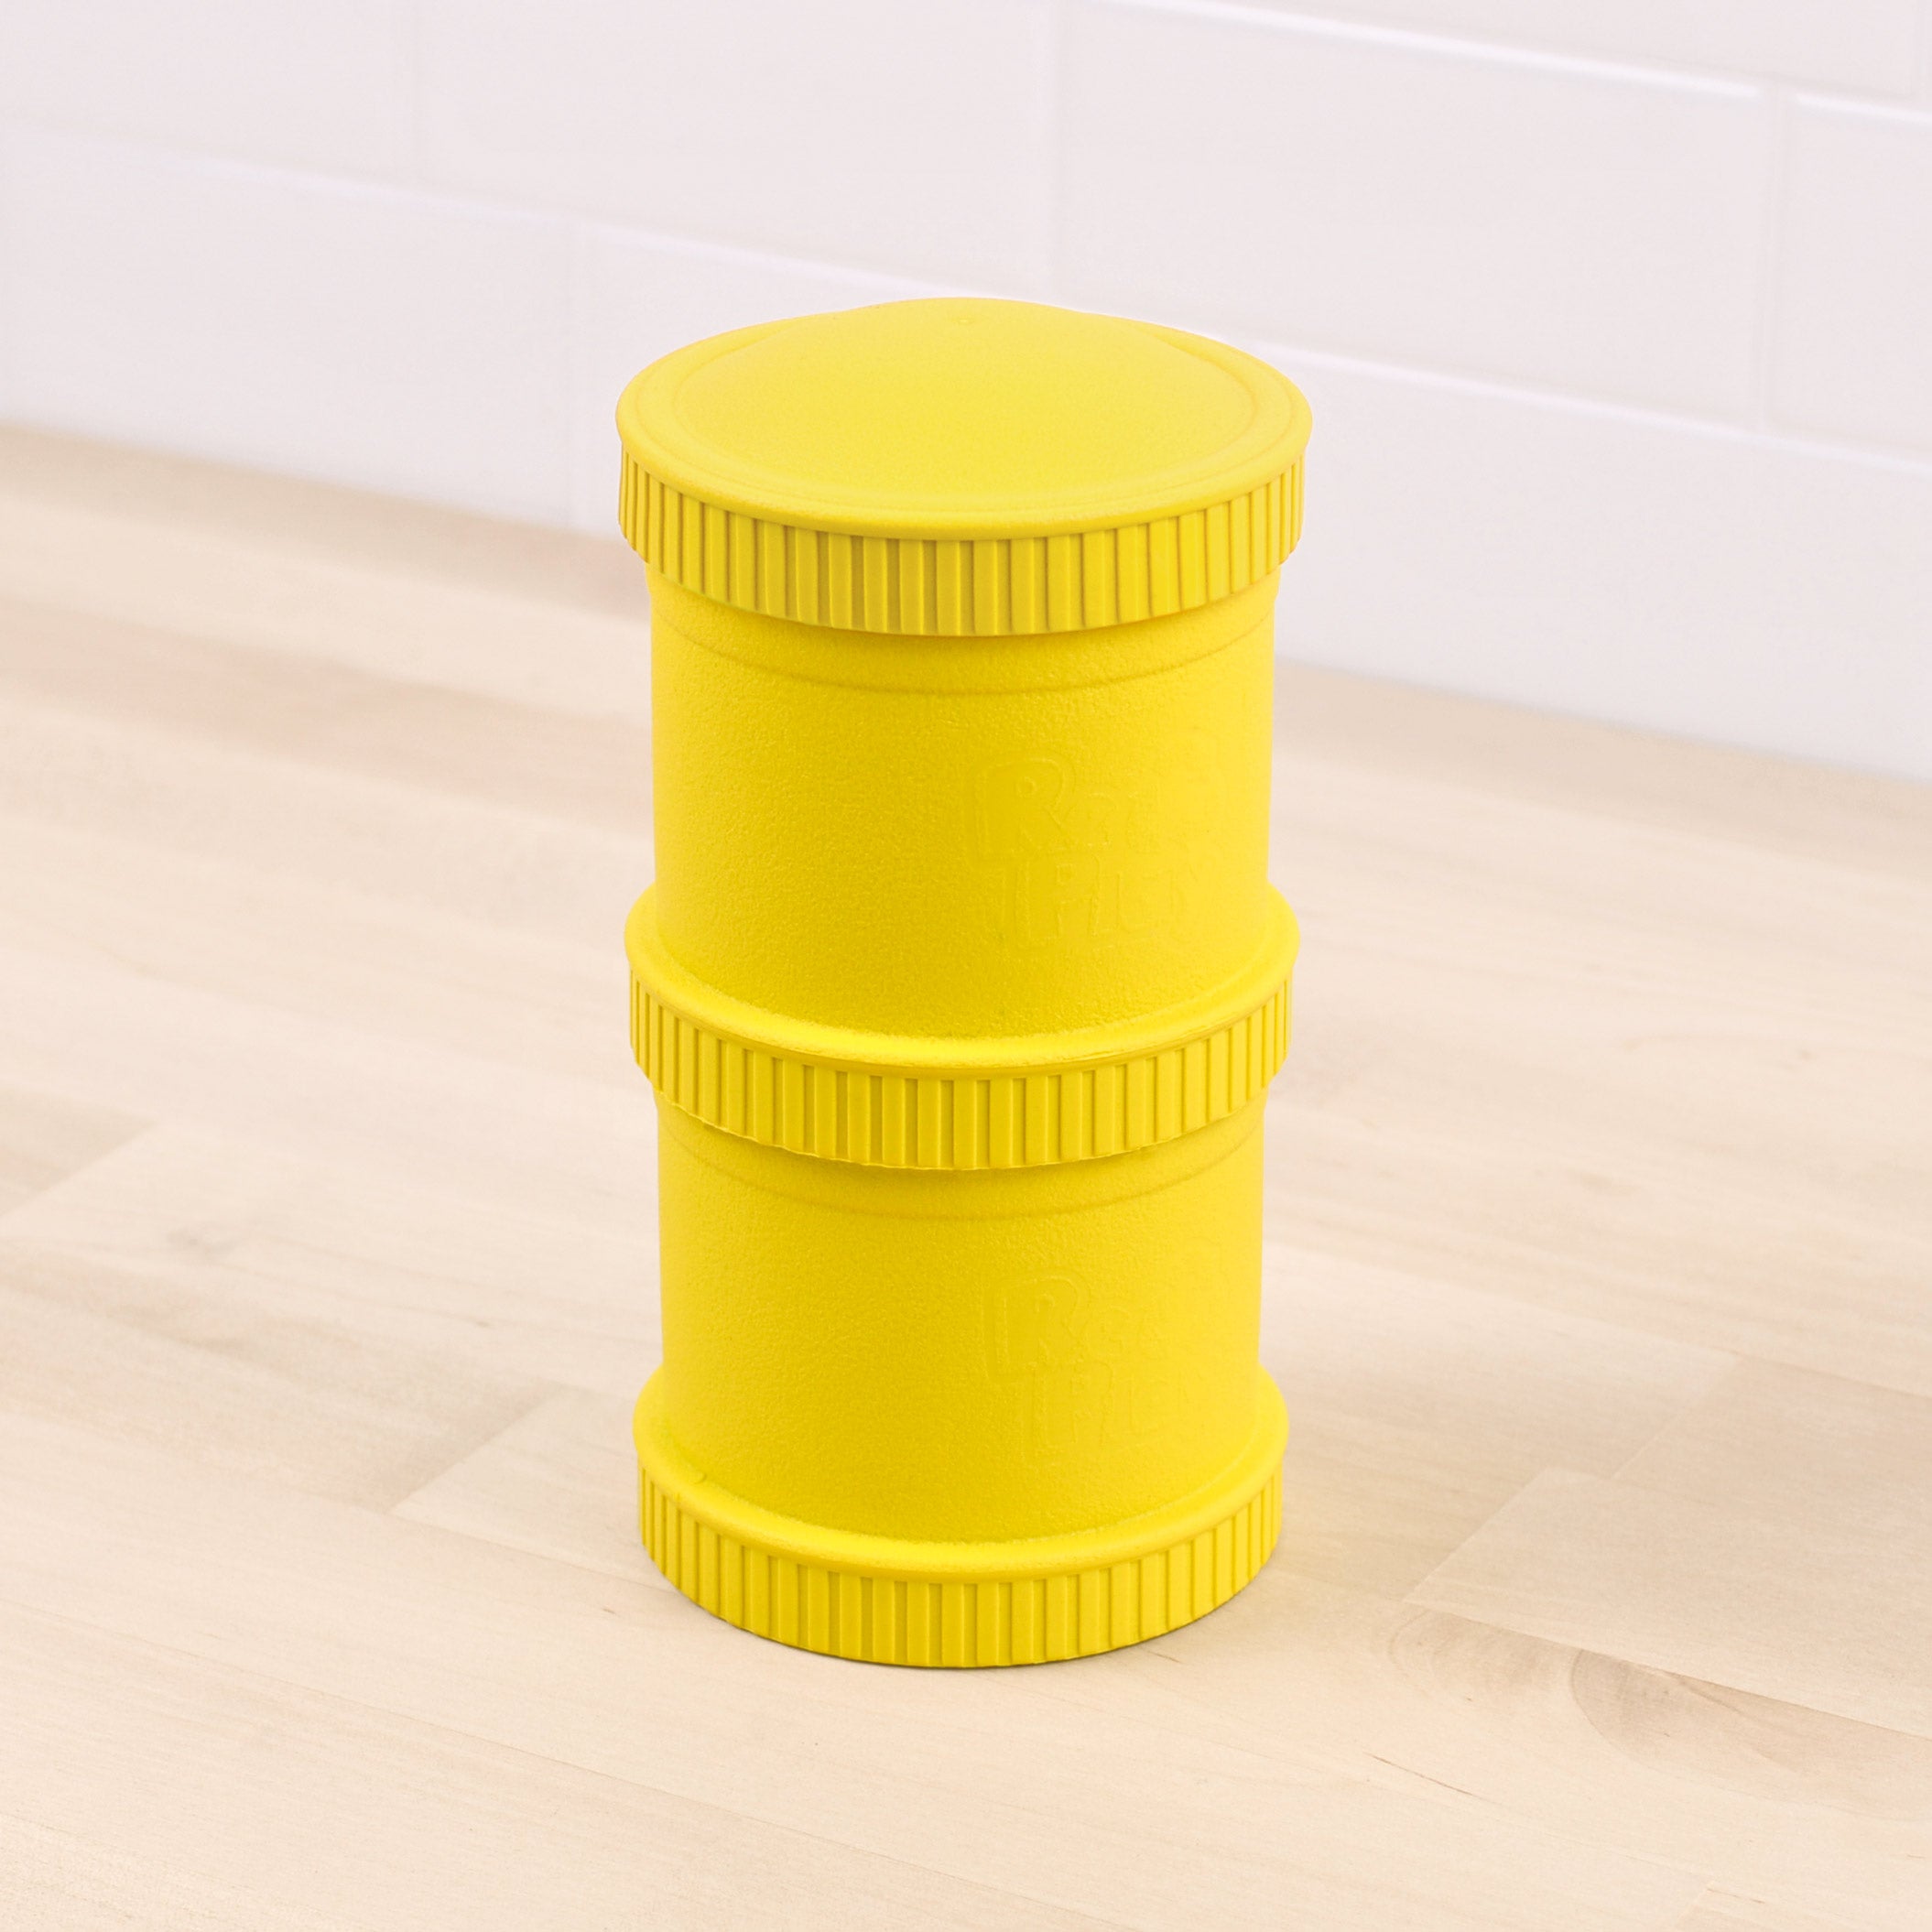 Re-play Snack Stack with 1 Lid-The Living Co.